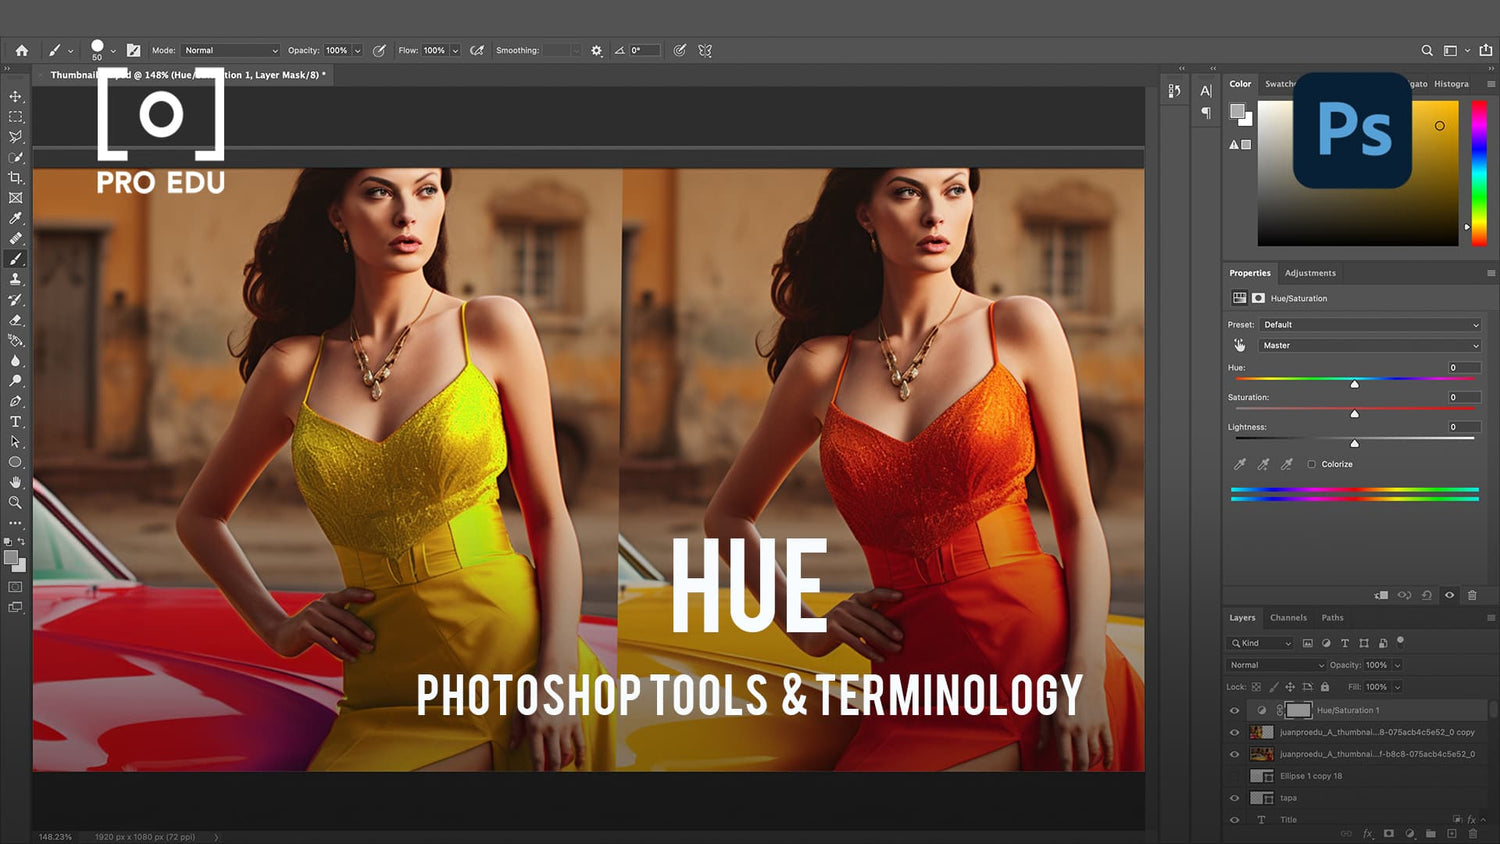 Hue Adjustment in Photoshop: Color Mastery